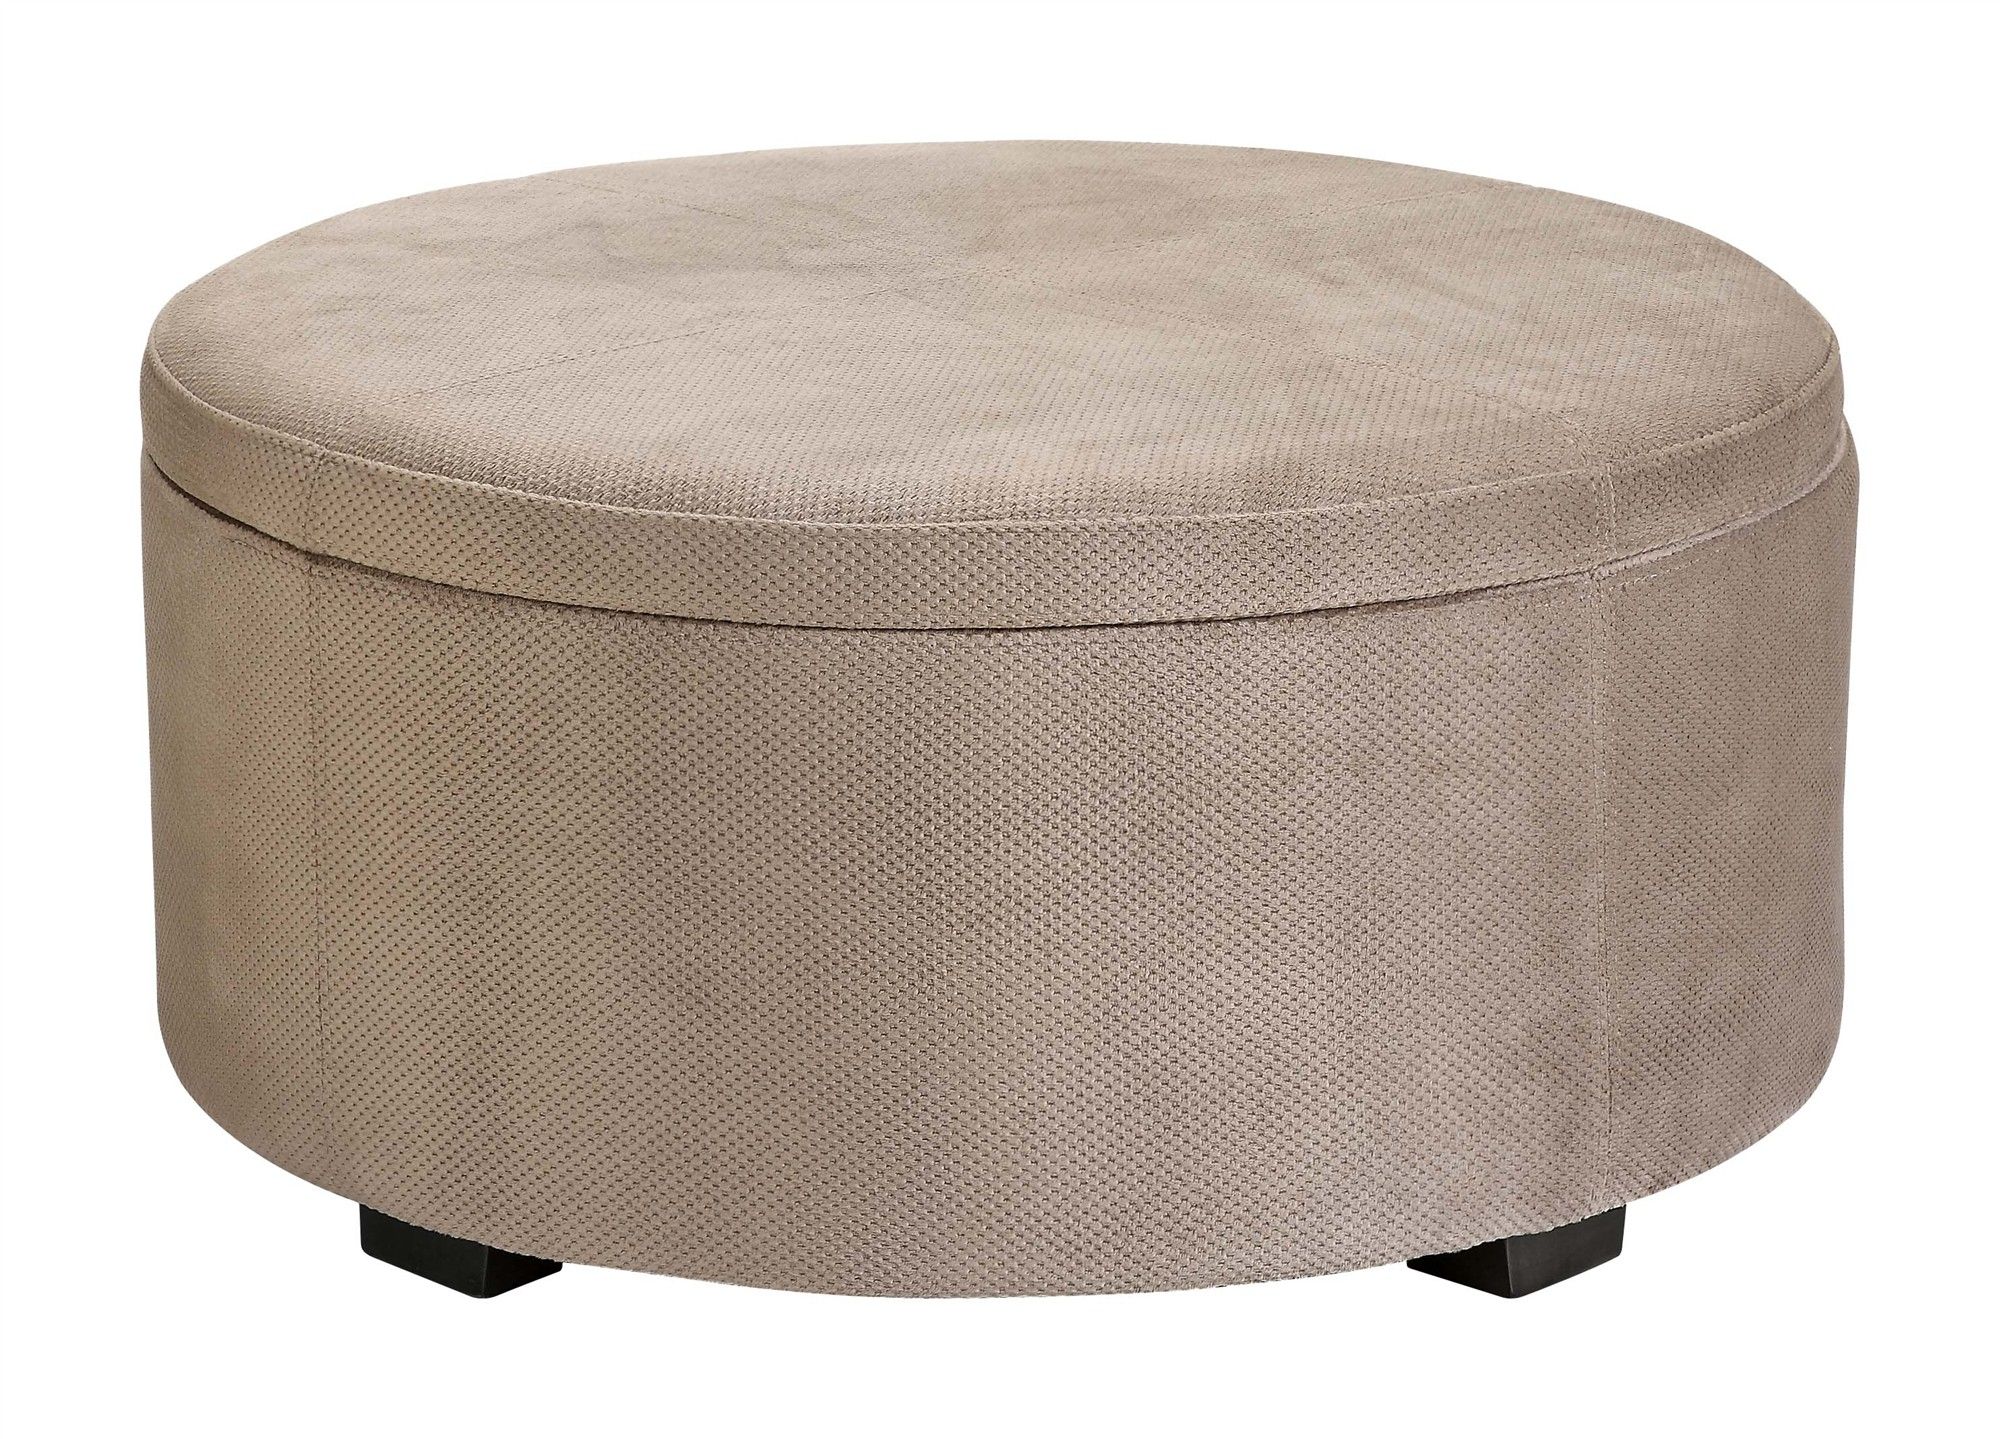 Awesome Small Round Ottoman – Homesfeed For Velvet Ribbed Fabric Round Storage Ottomans (View 9 of 20)